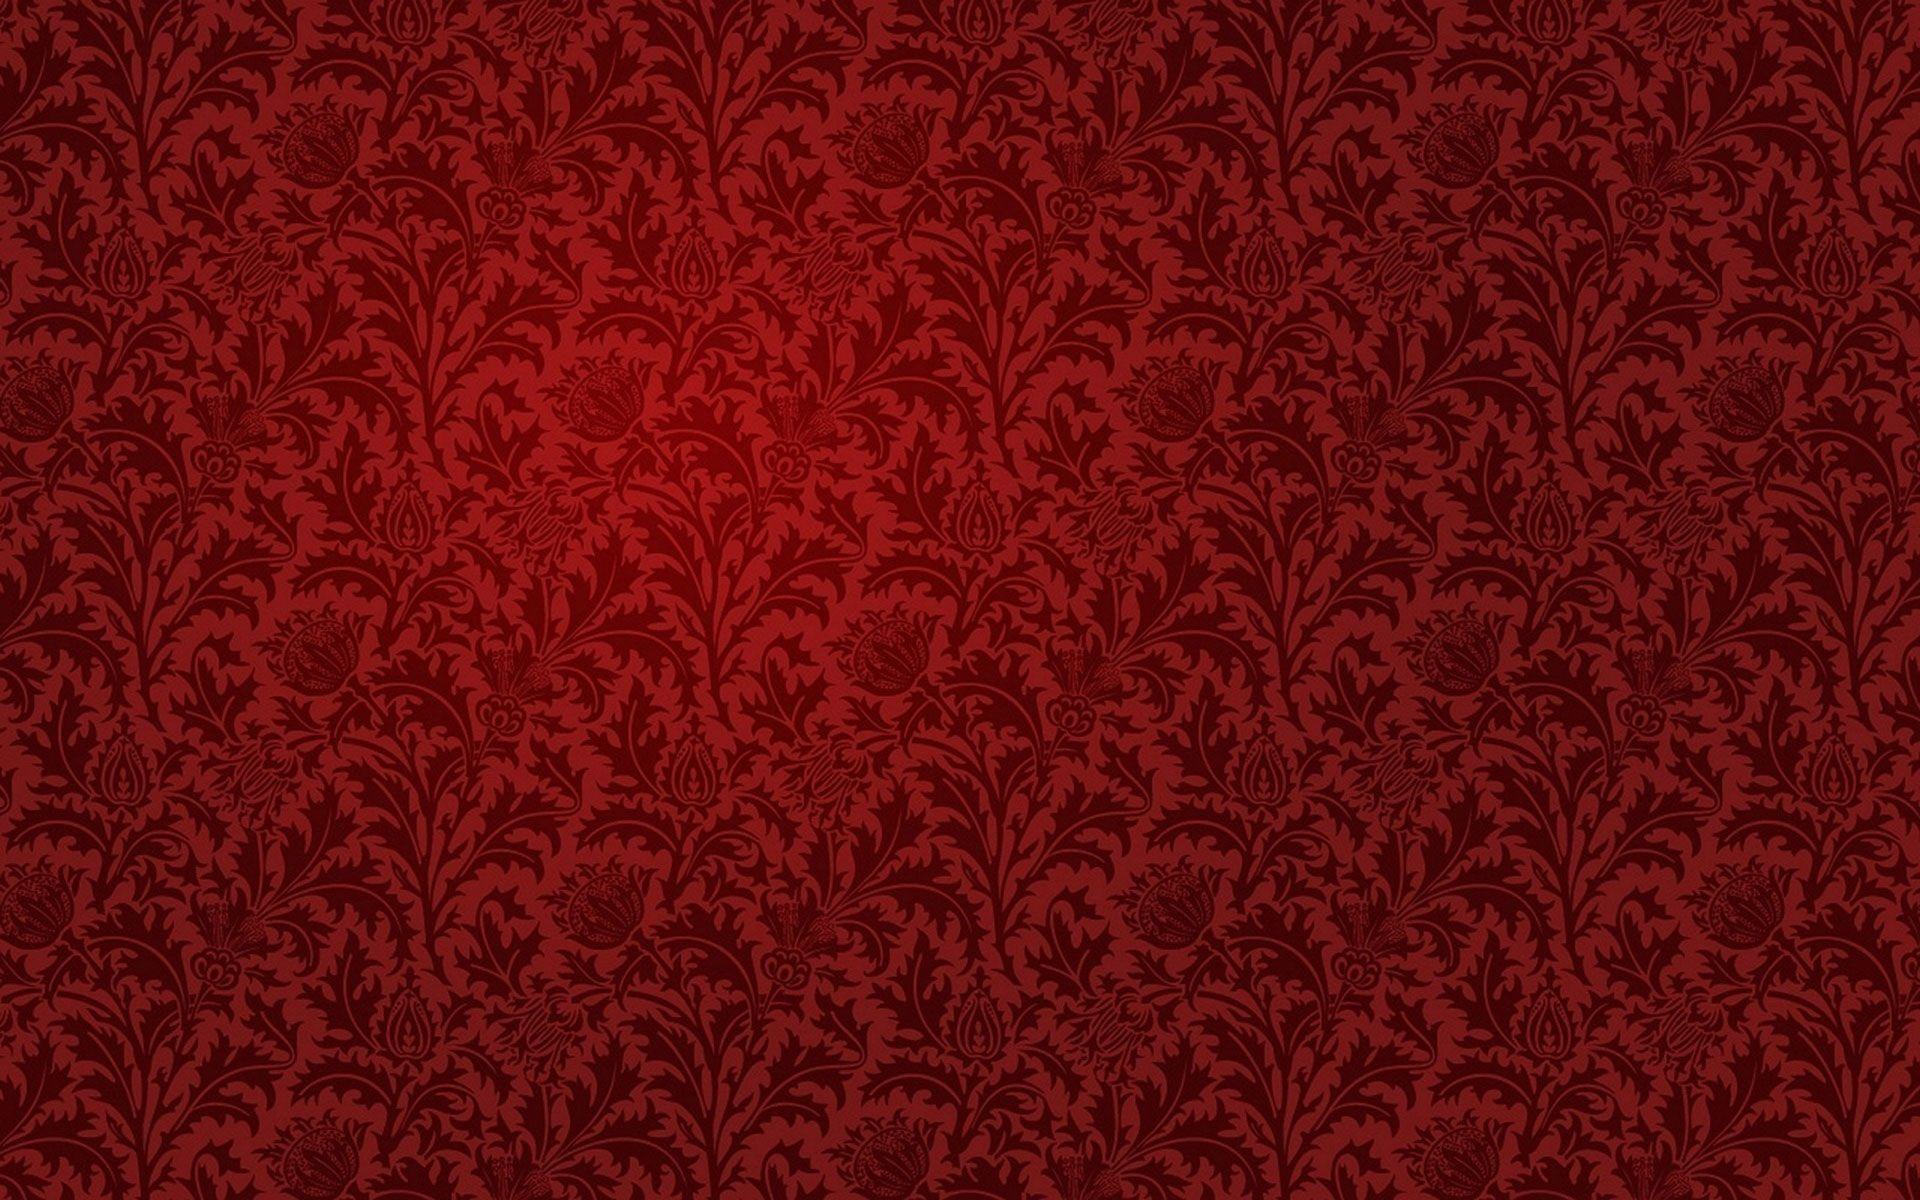 HD Red Rose Wallpaper (73+ images)